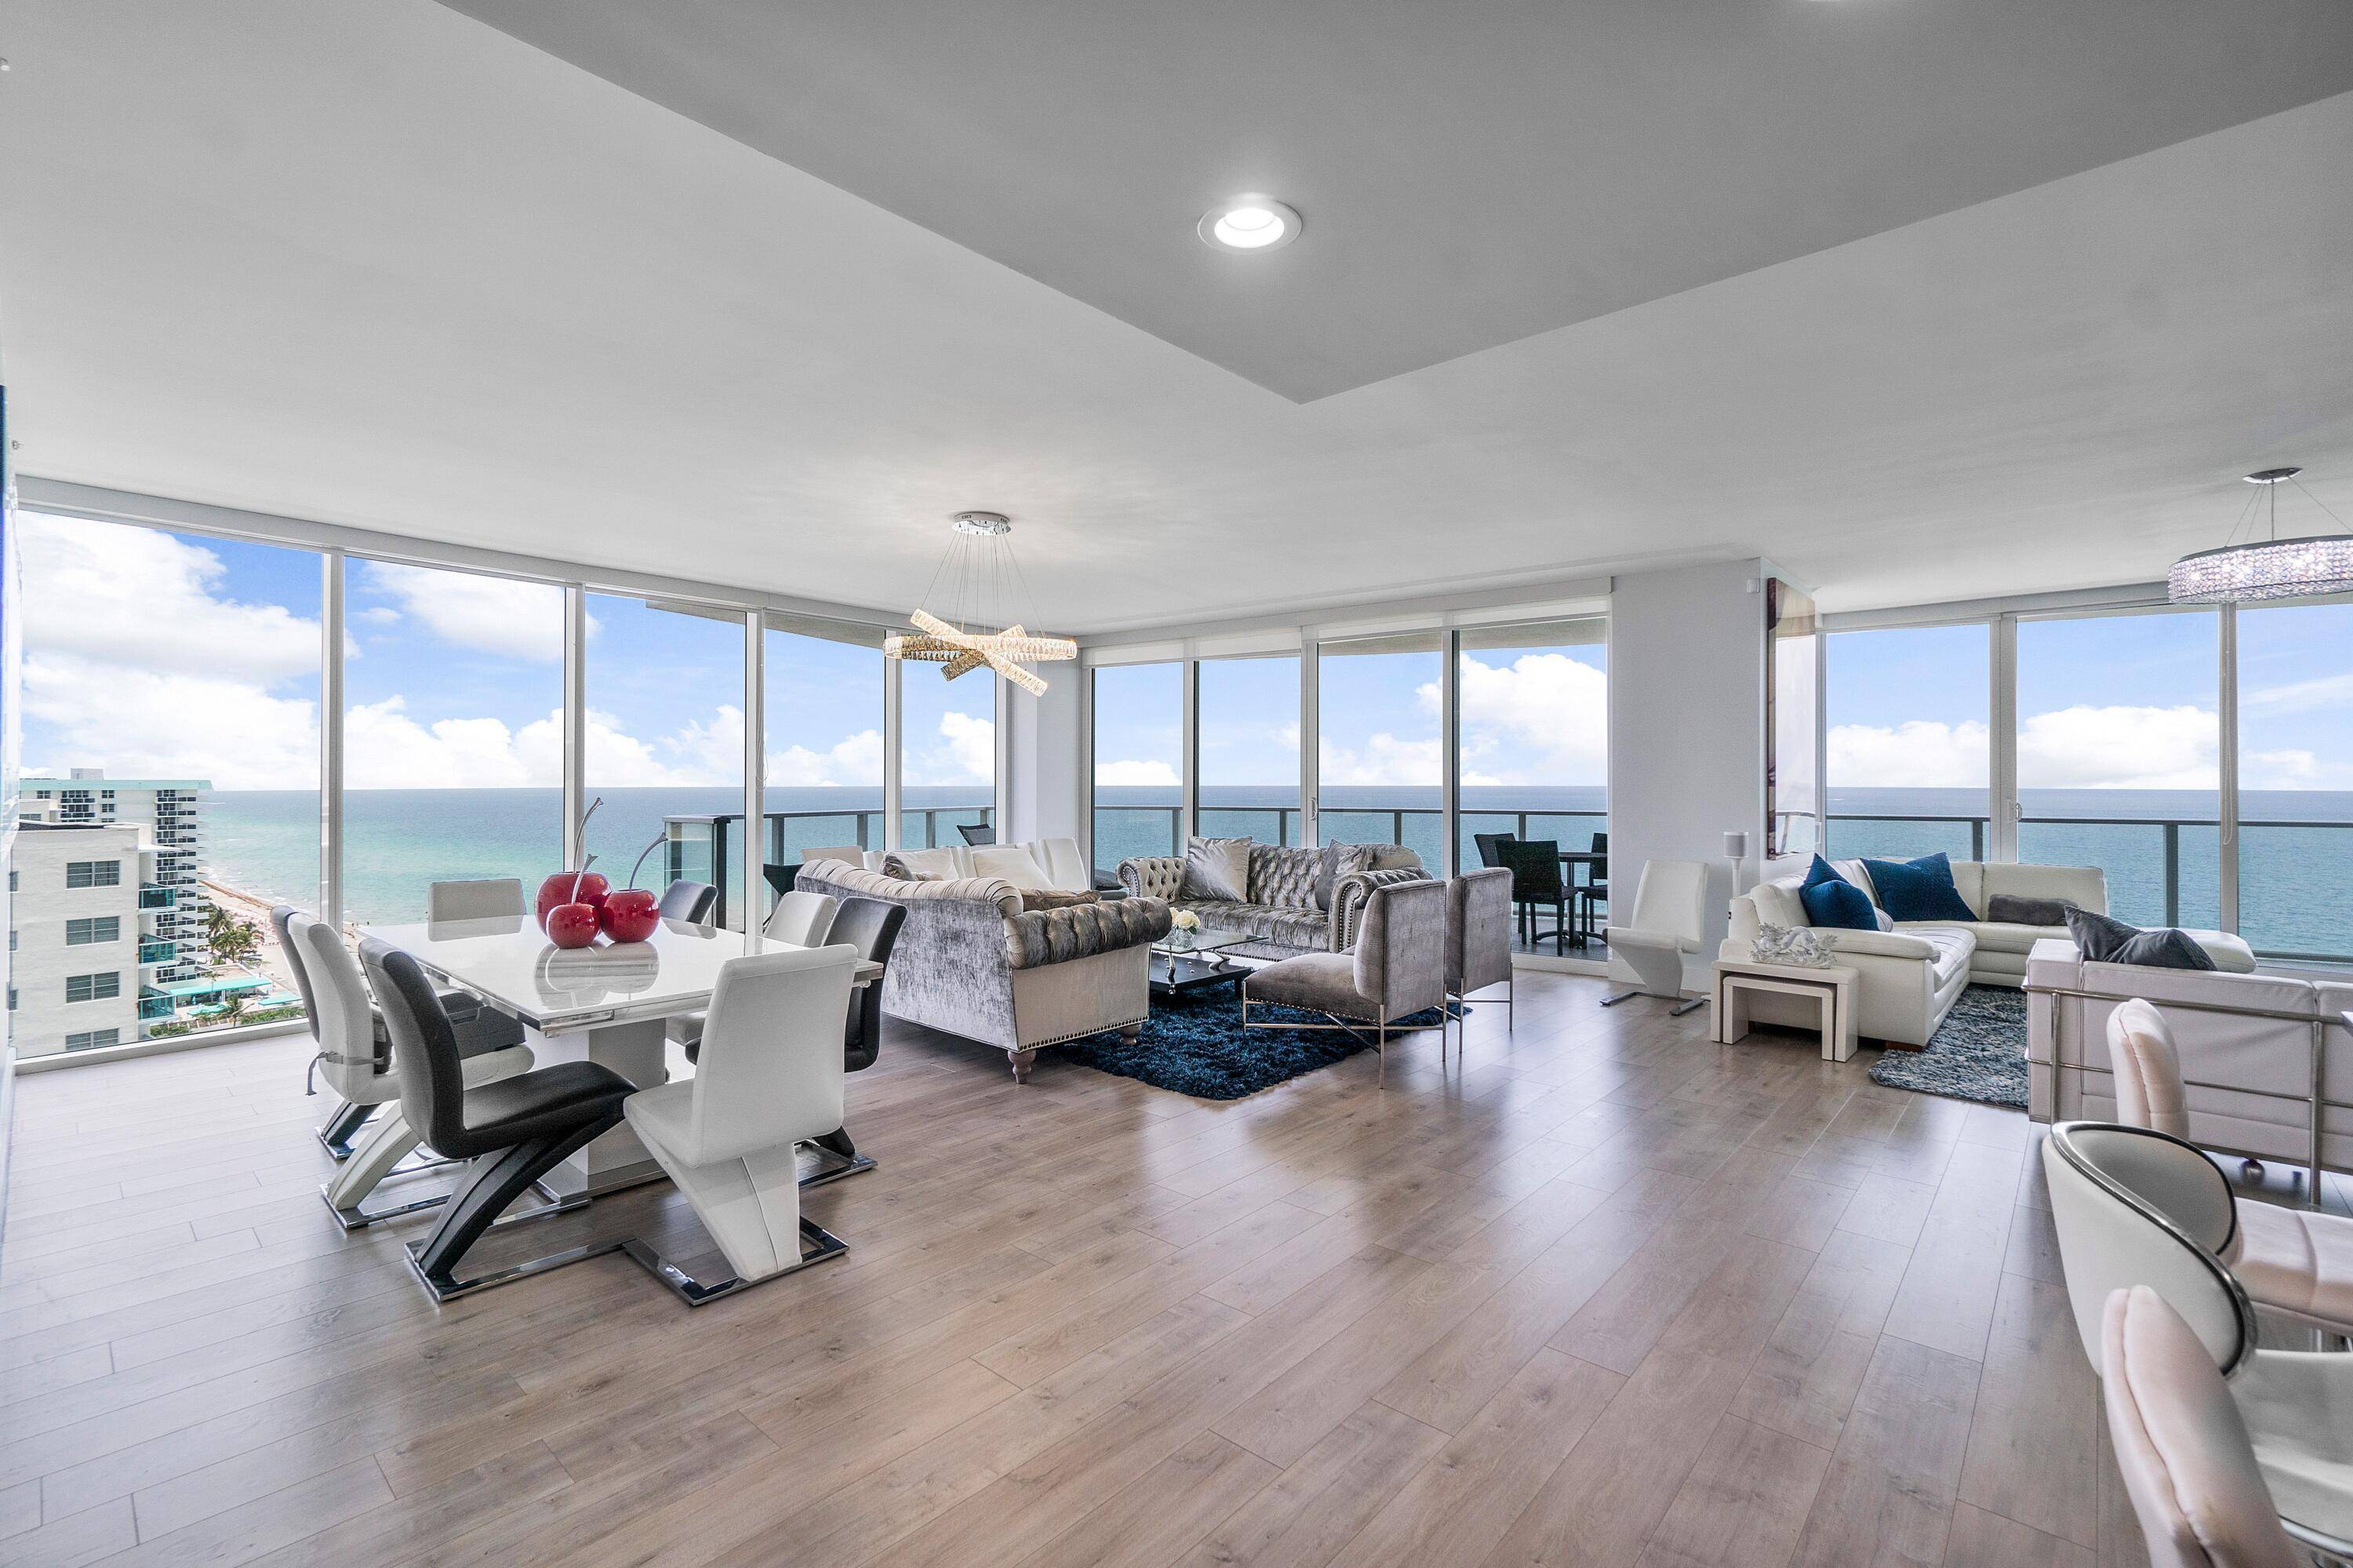 Panoramic ocean views can be found throughout this 4 bedroom.